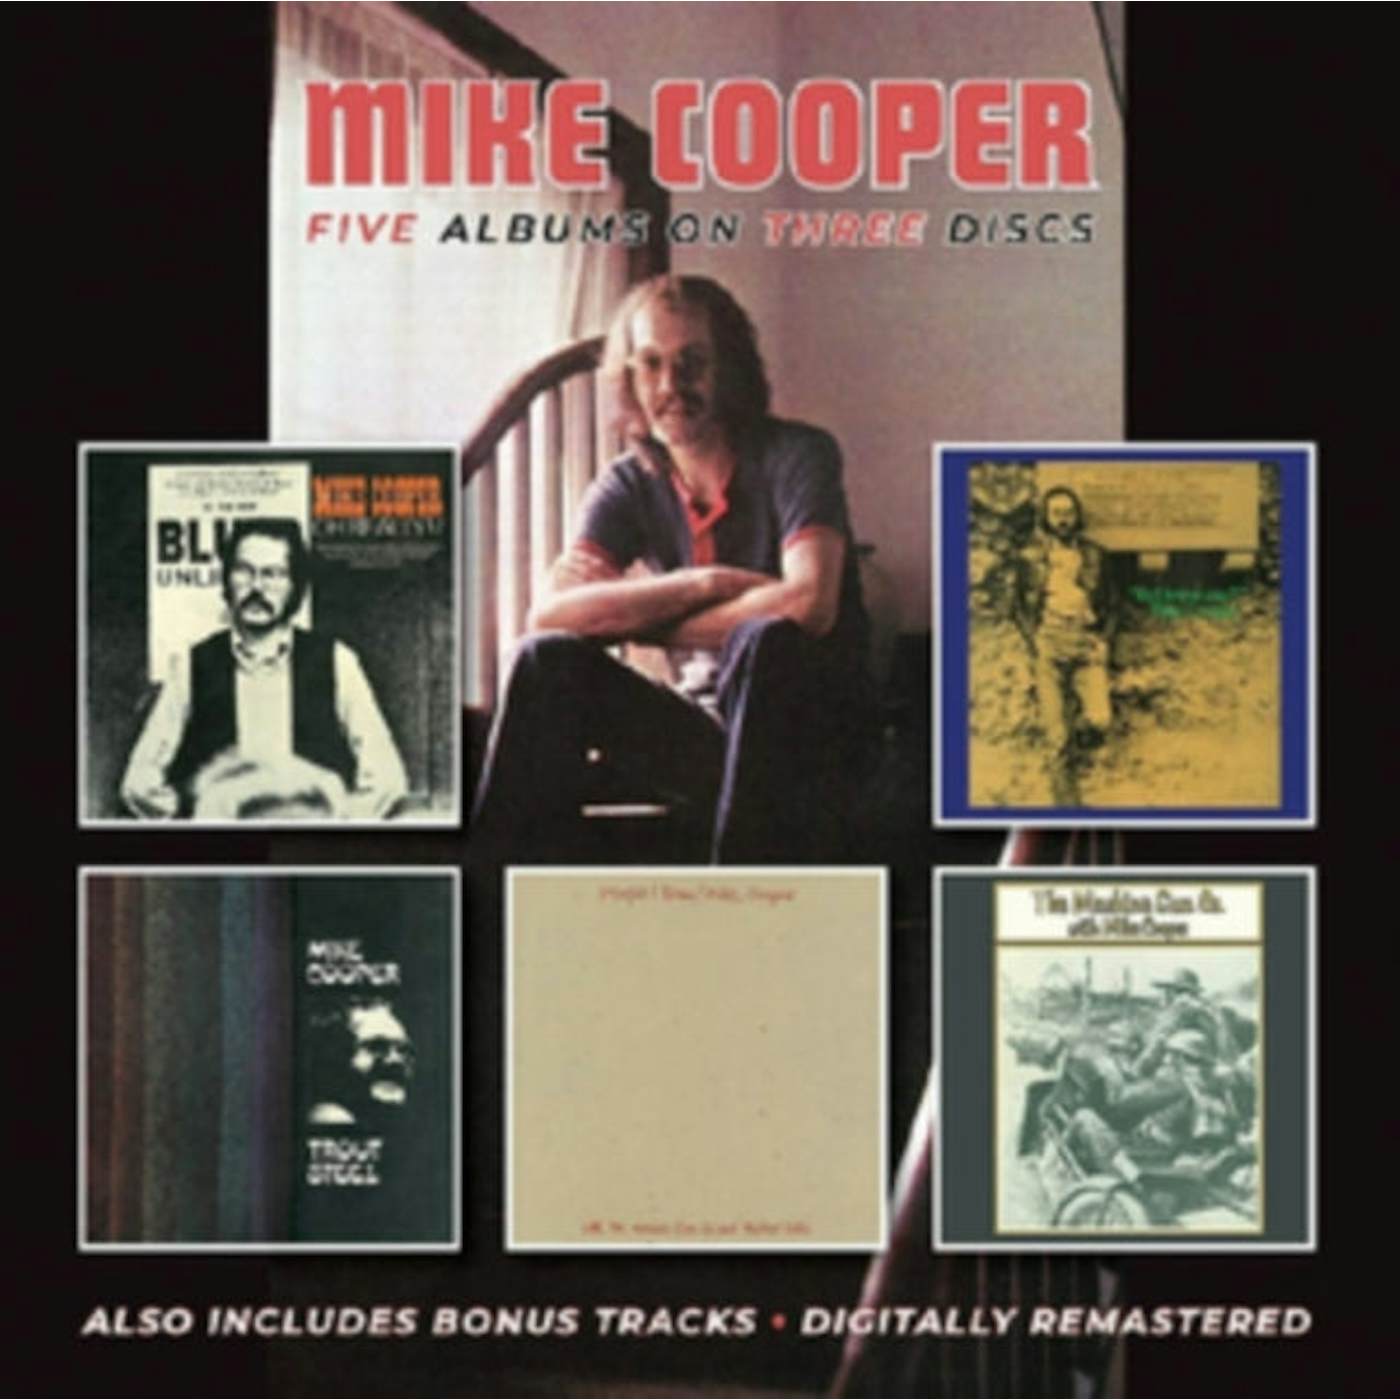 Mike Cooper CD - Oh Really?! / Do I Know You? / Trout Steel / Places I Know / The Machine Gun Co. With Mike Cooper